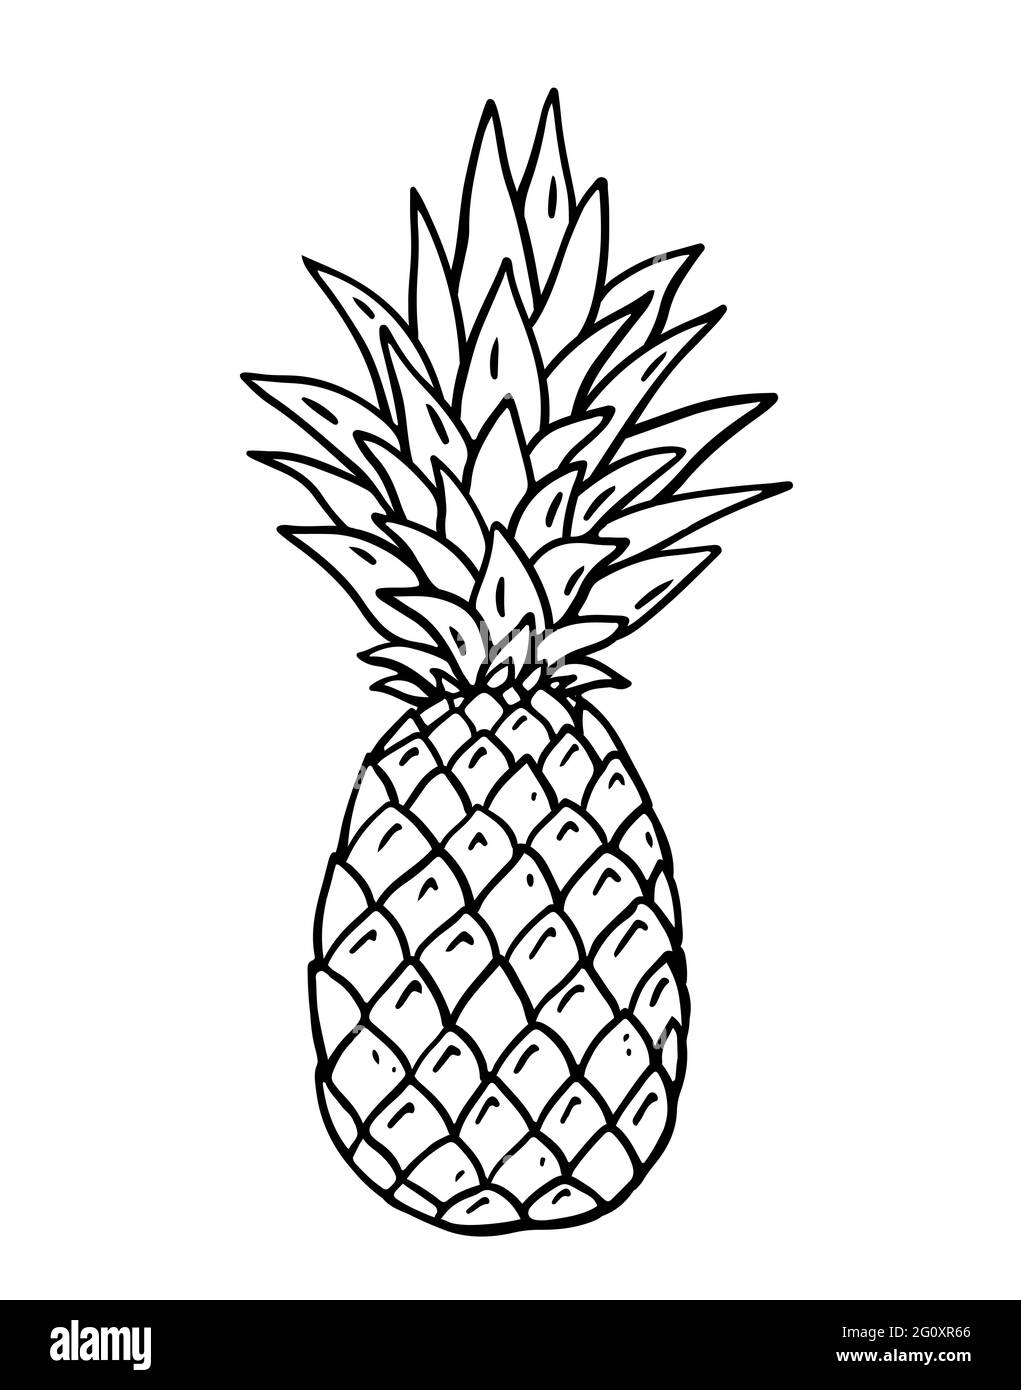 Ripe pineapple isolated on white background. Vector hand-drawn illustration in doodle style. Perfect for your project, card, logo, decorations. Stock Vector